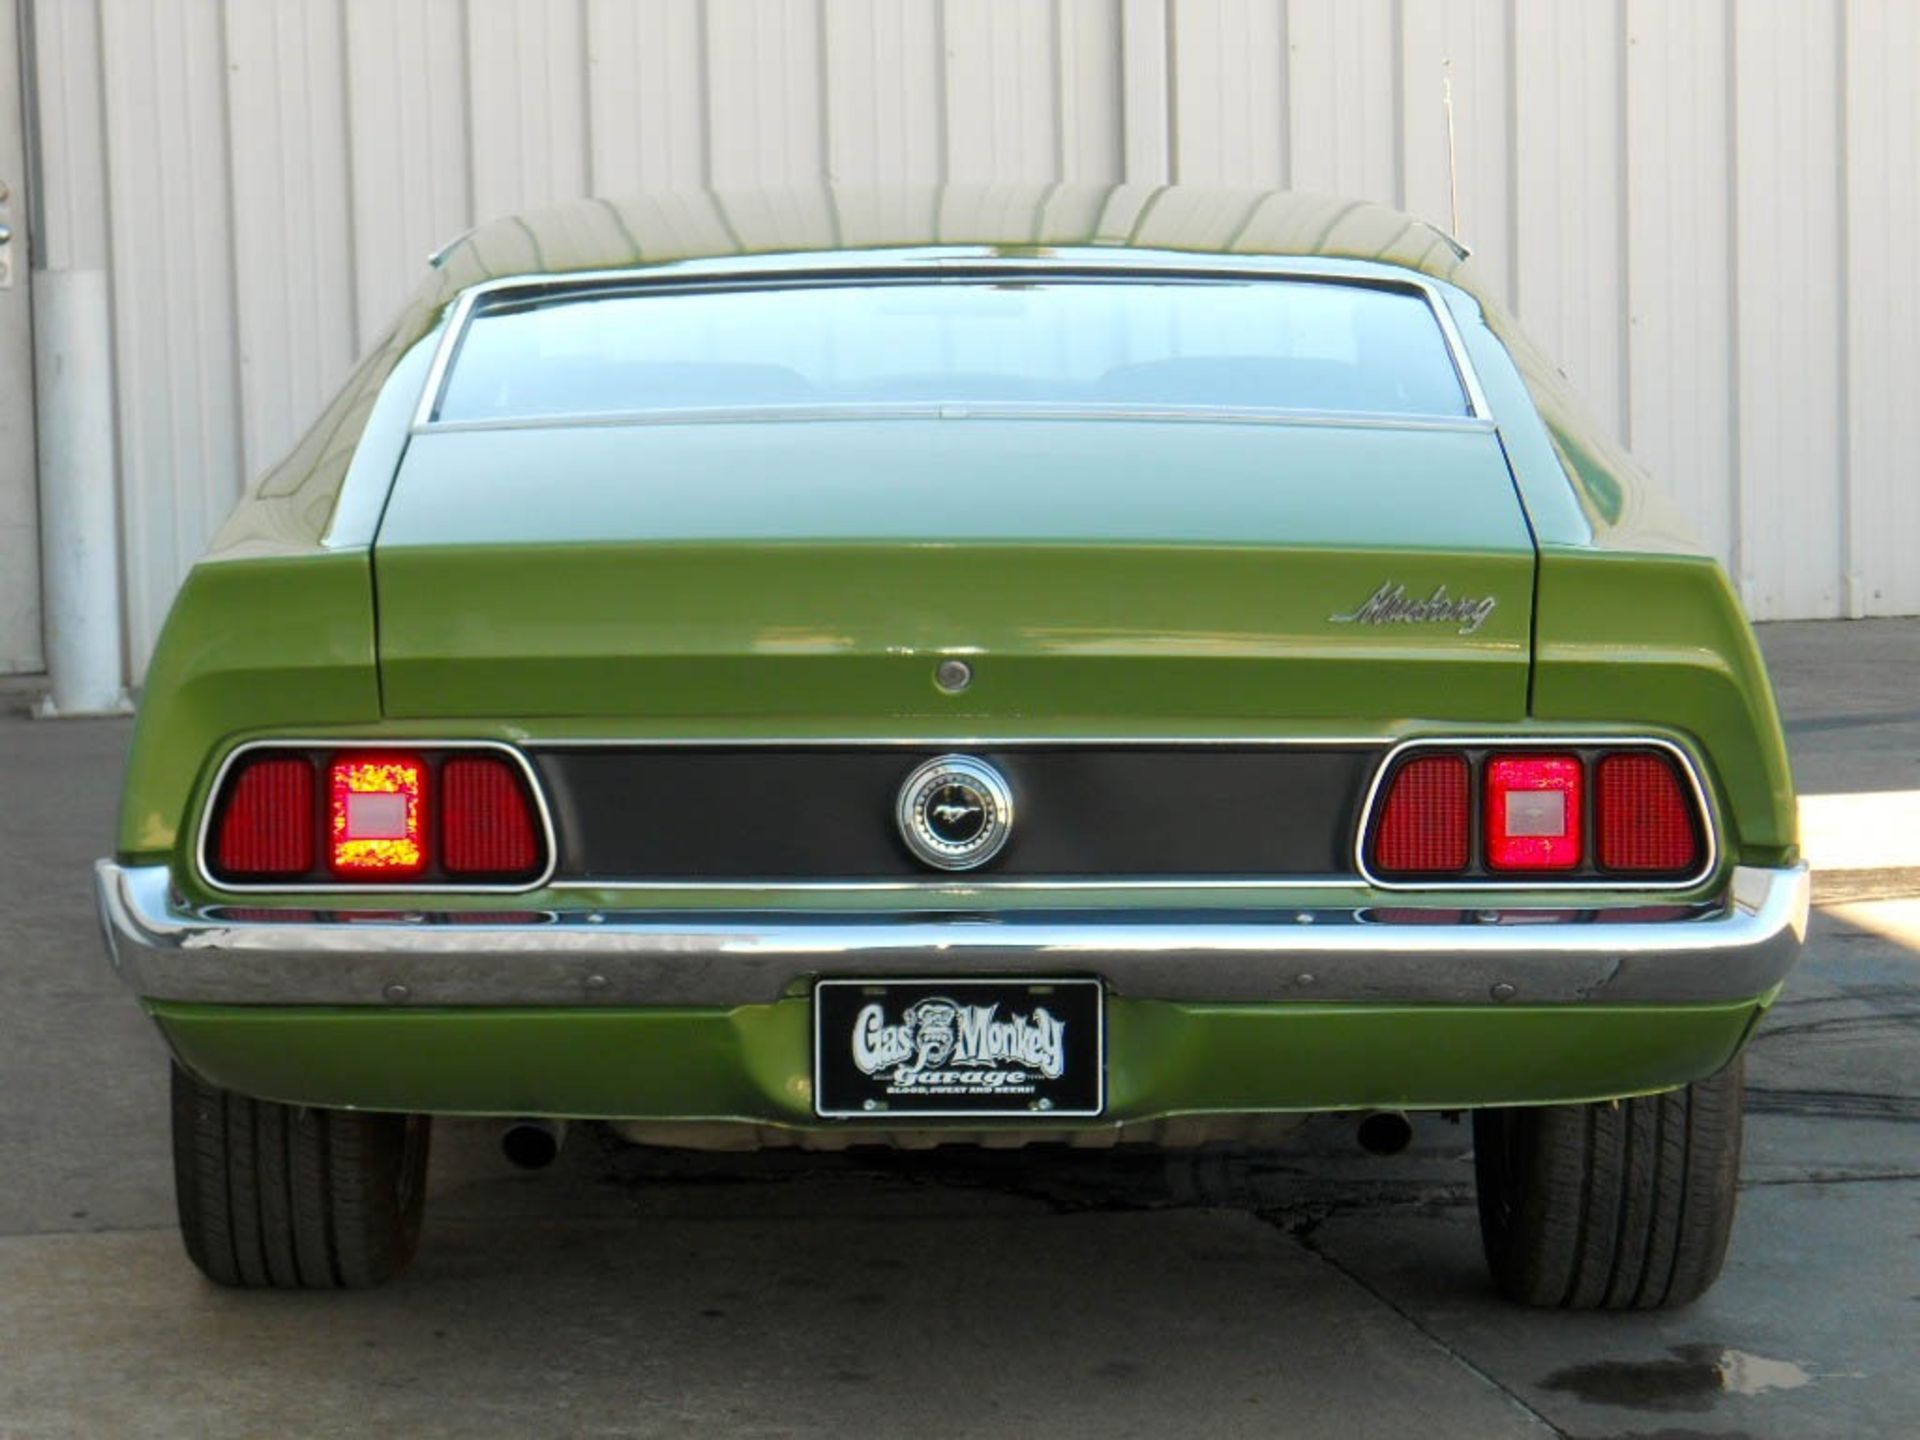 1972 Ford Mustang Fastback 302 V8 Automatic “Resto-Mod” undertaken by 'Gas Monkey' Garage - Image 5 of 14